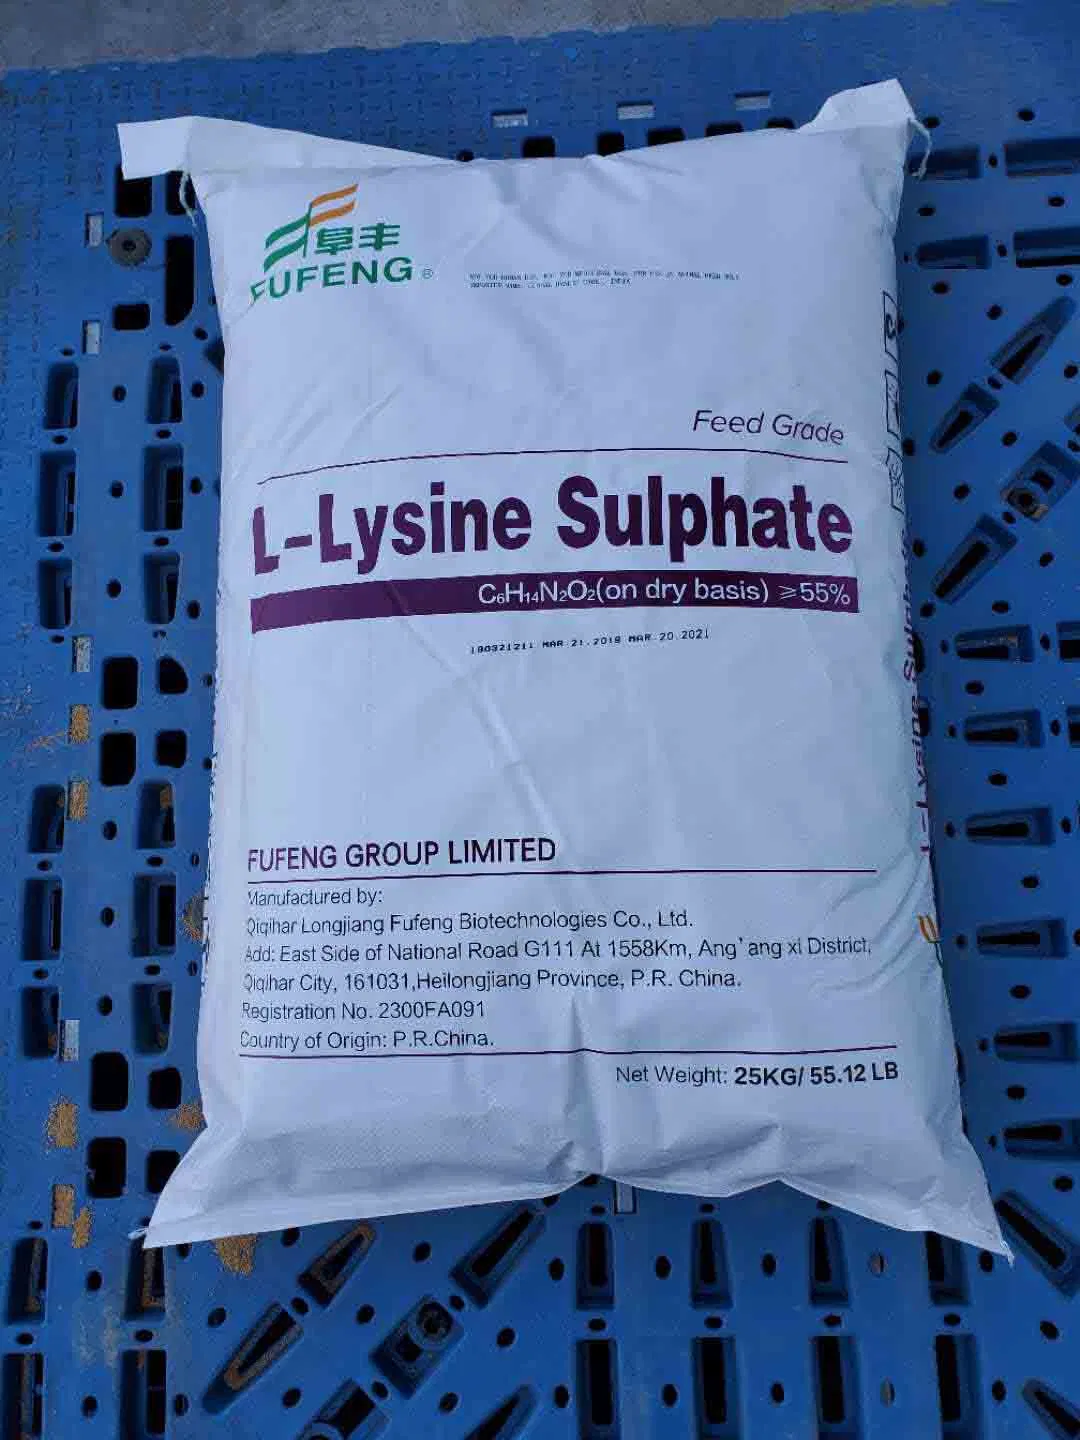 Nutritional Supplement L-Lysine Sulphate for Balancing Livestock Rations with Amino-Acids